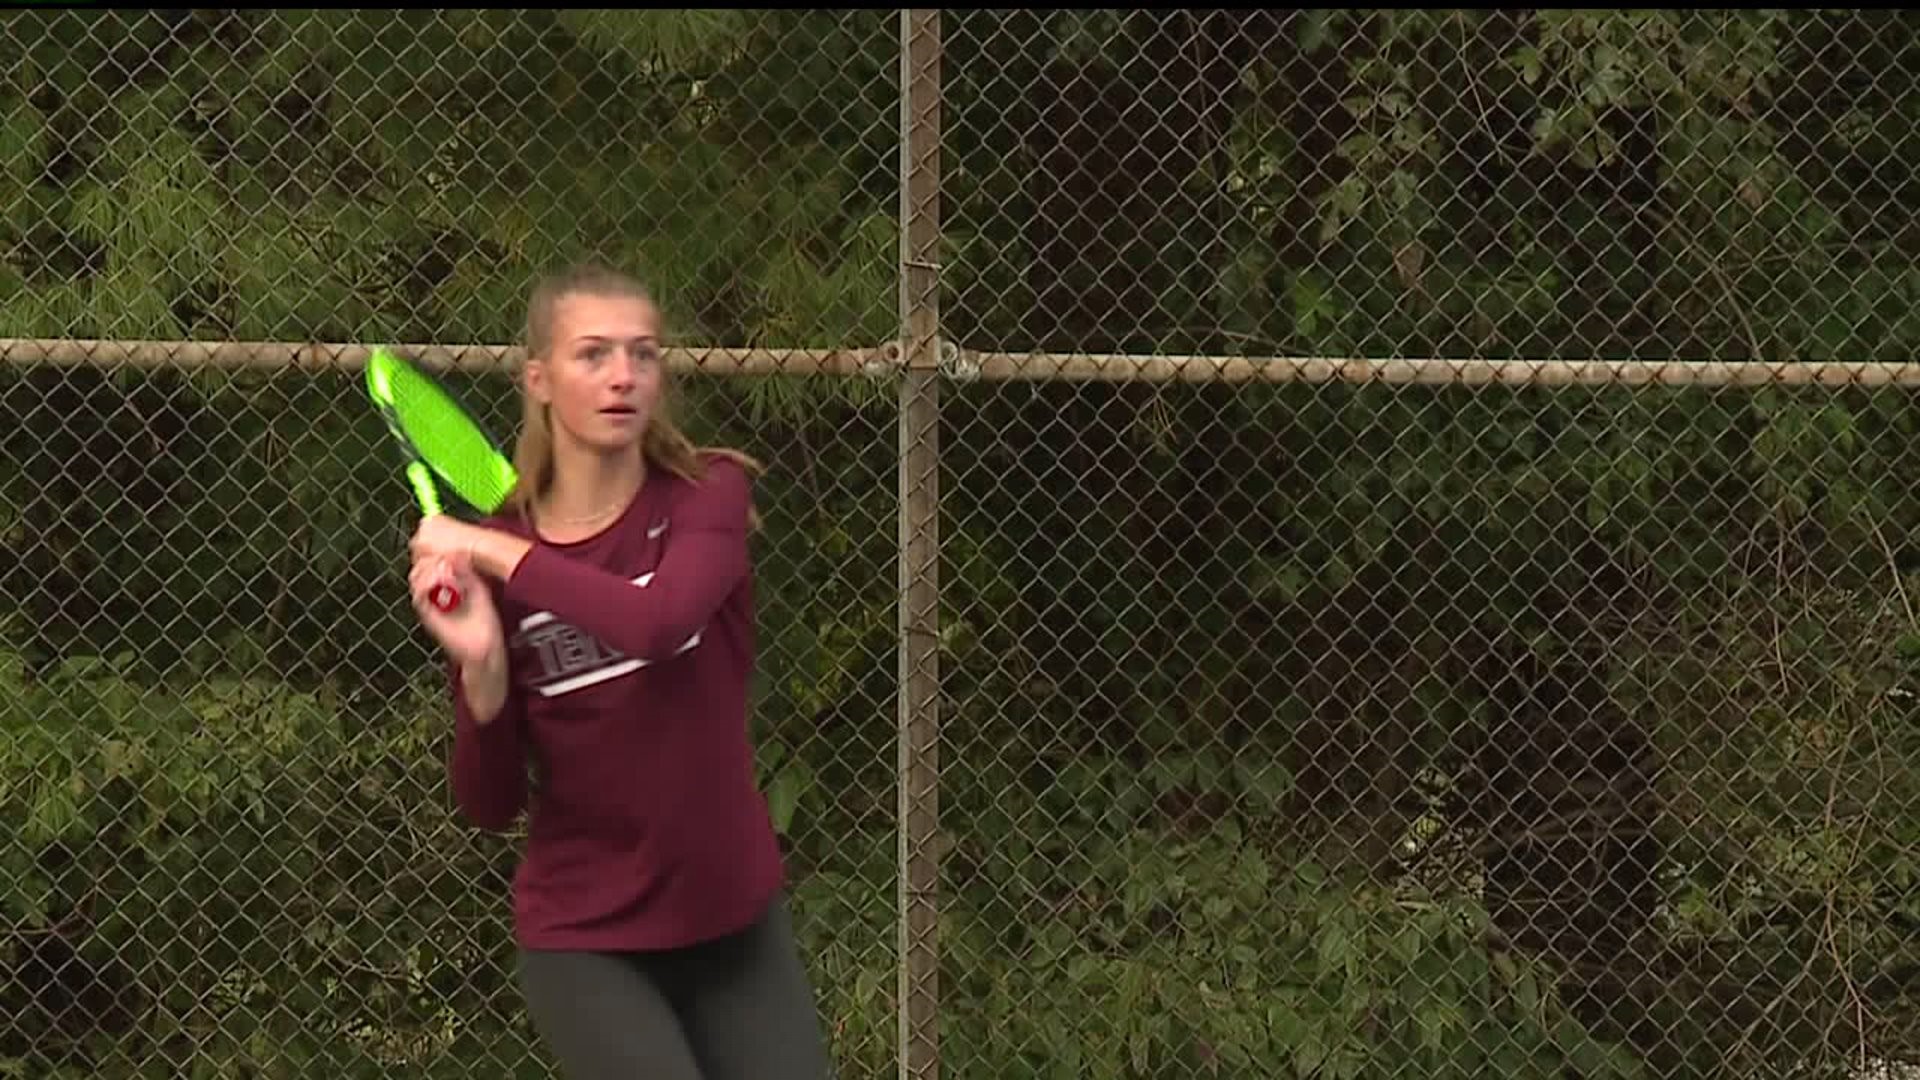 WQAD Sports - October 22nd